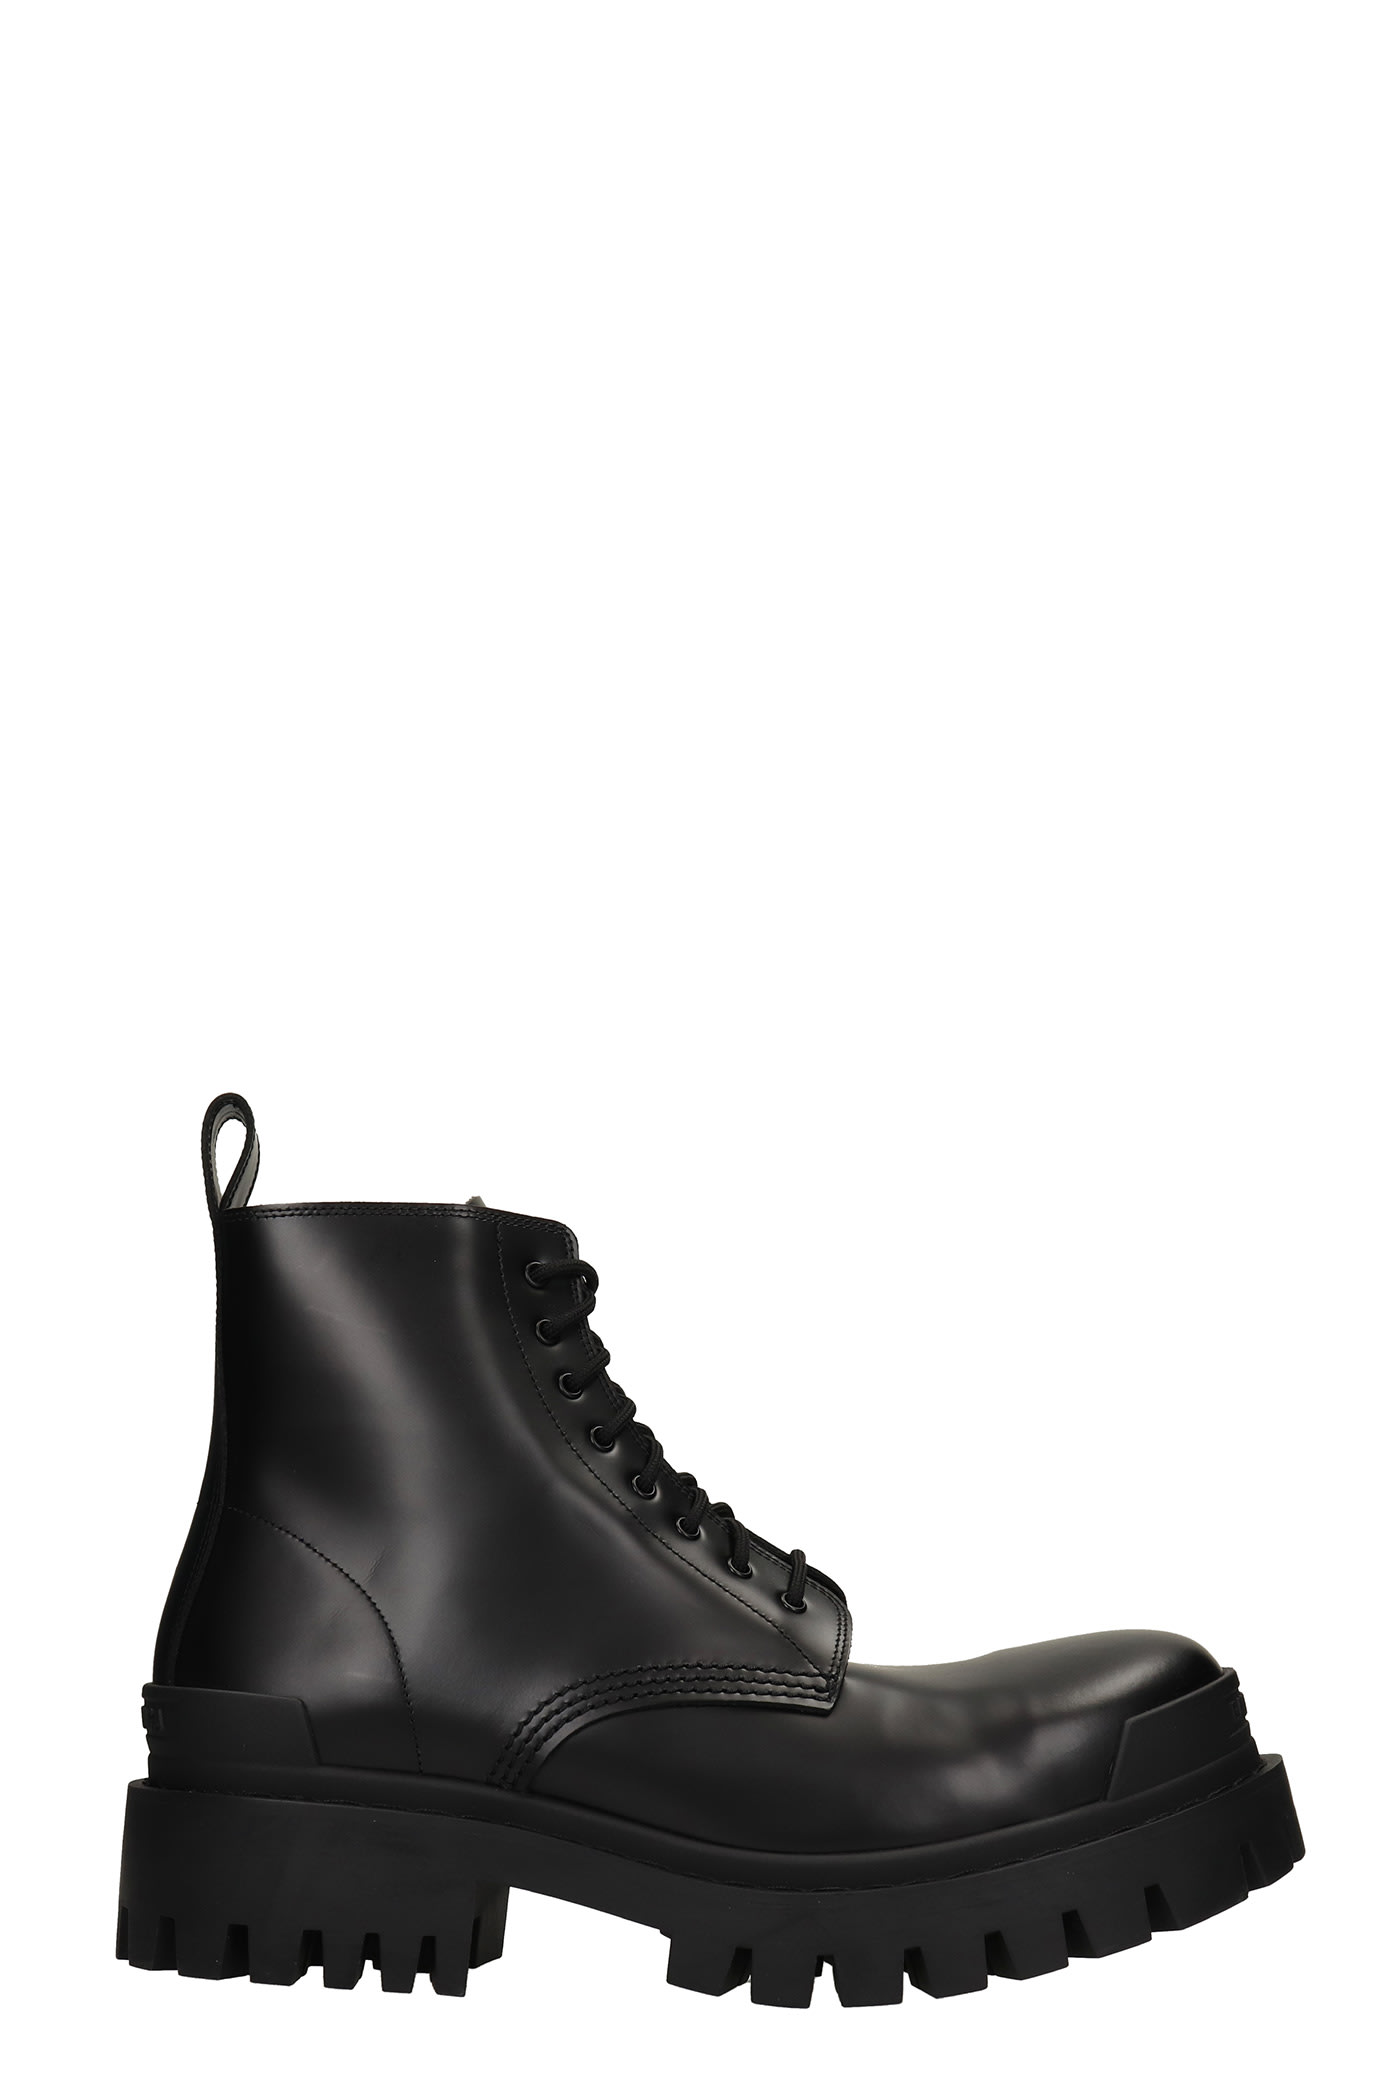 Balenciaga Strike Bootie Combat Boots In Black Leather